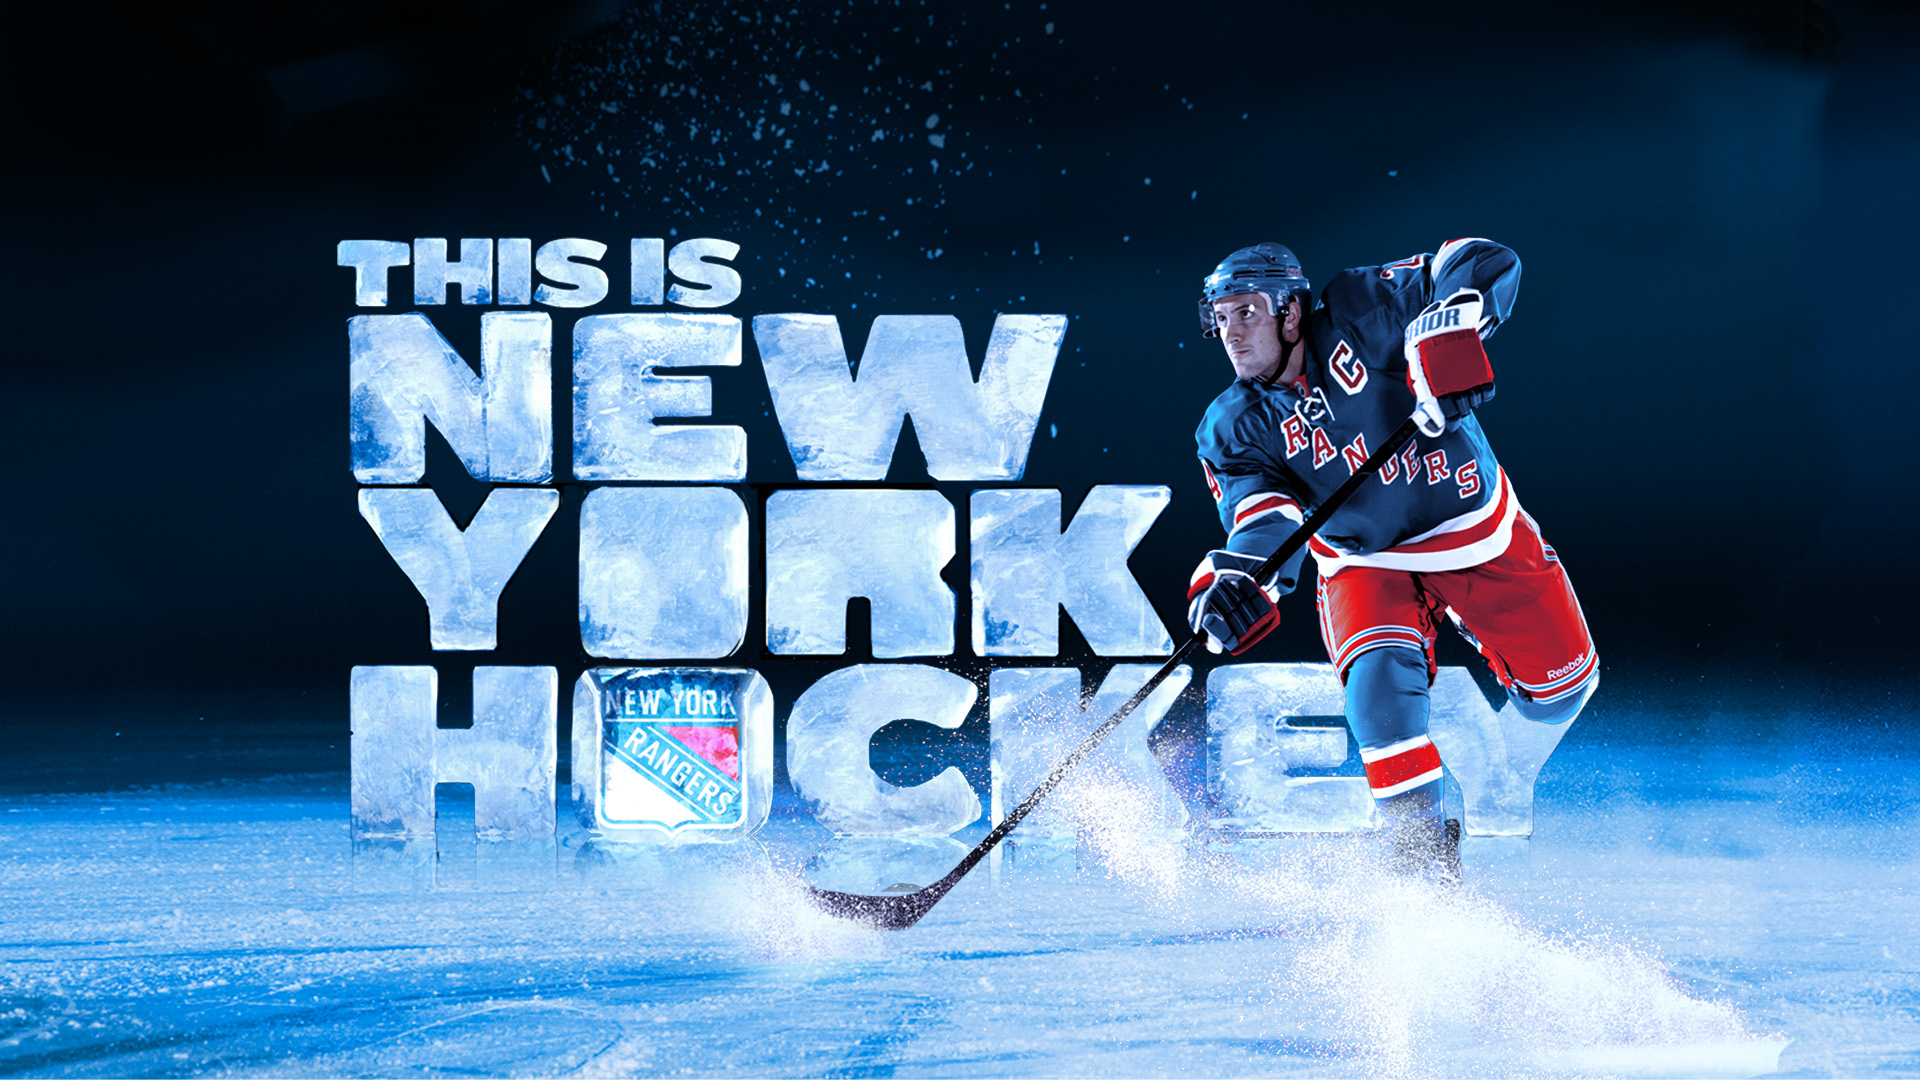 1920x1080 Free download New York Rangers Blog [] for your Desktop, Mobile \u0026 Tablet | Explore 48+ NY Rangers Logo Wallpaper | Texas Rangers Wallpapers and Screensavers, Rangers Logo Wallpaper, Texas Rangers Wallpaper